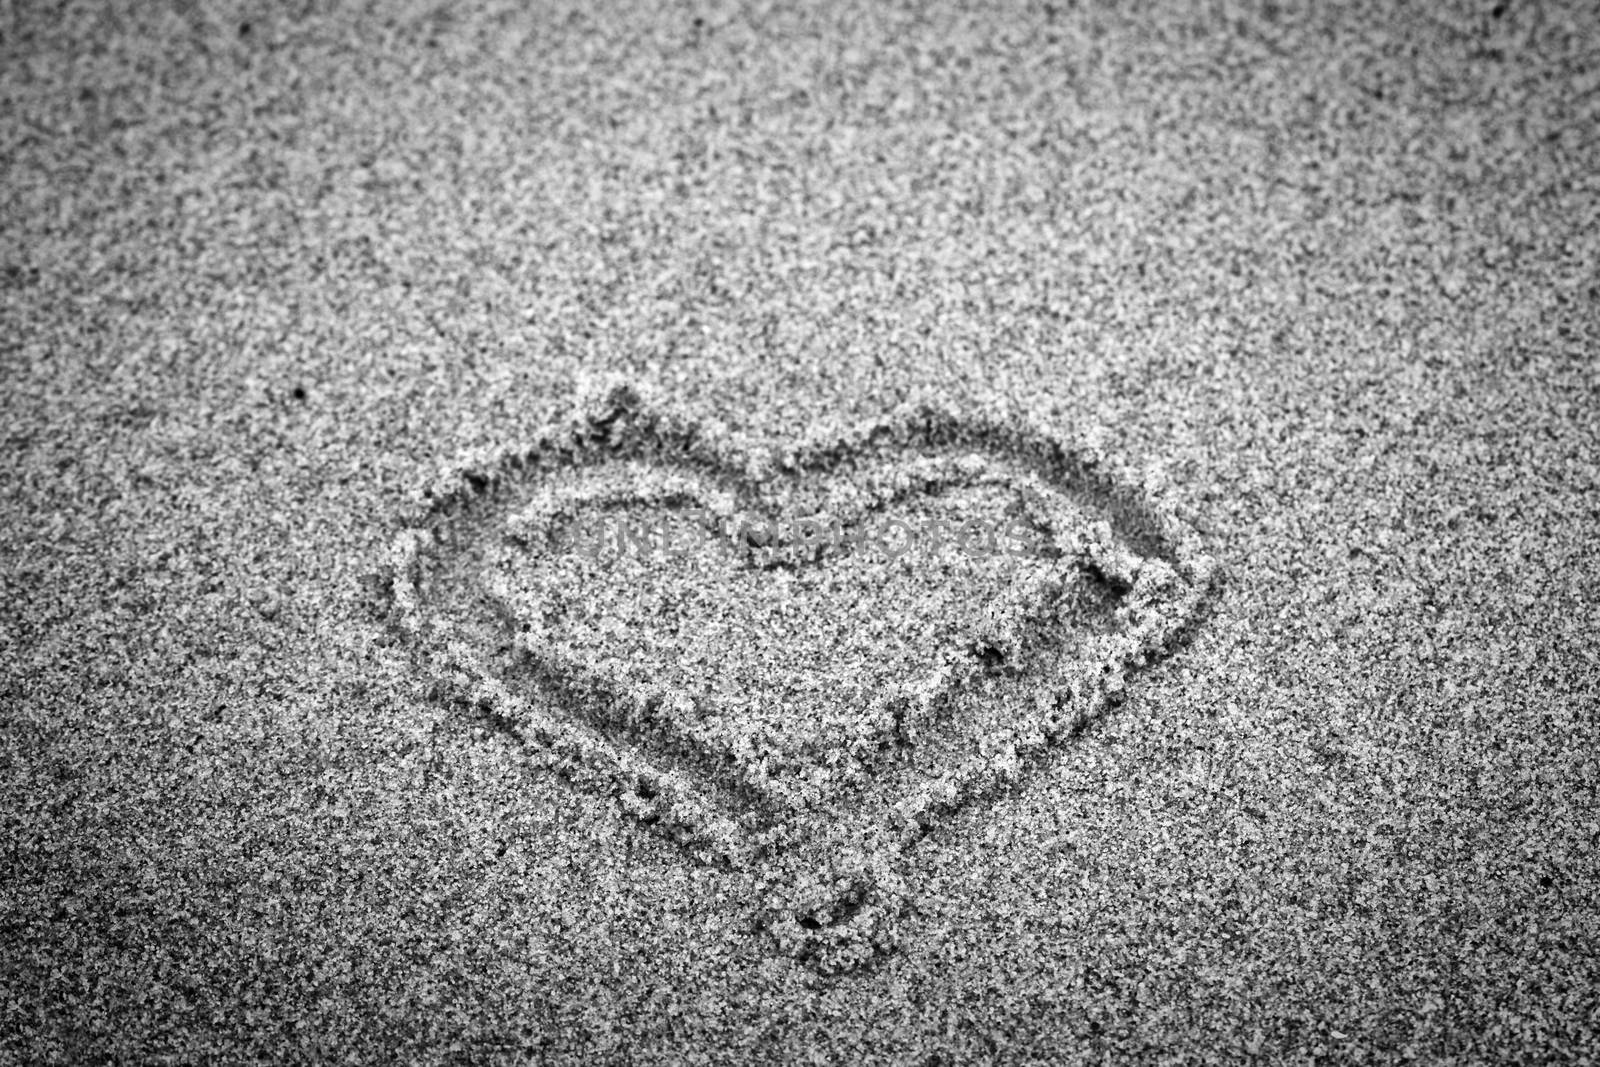 Heart shape on sand. Romantic, black and white, hand drawn.